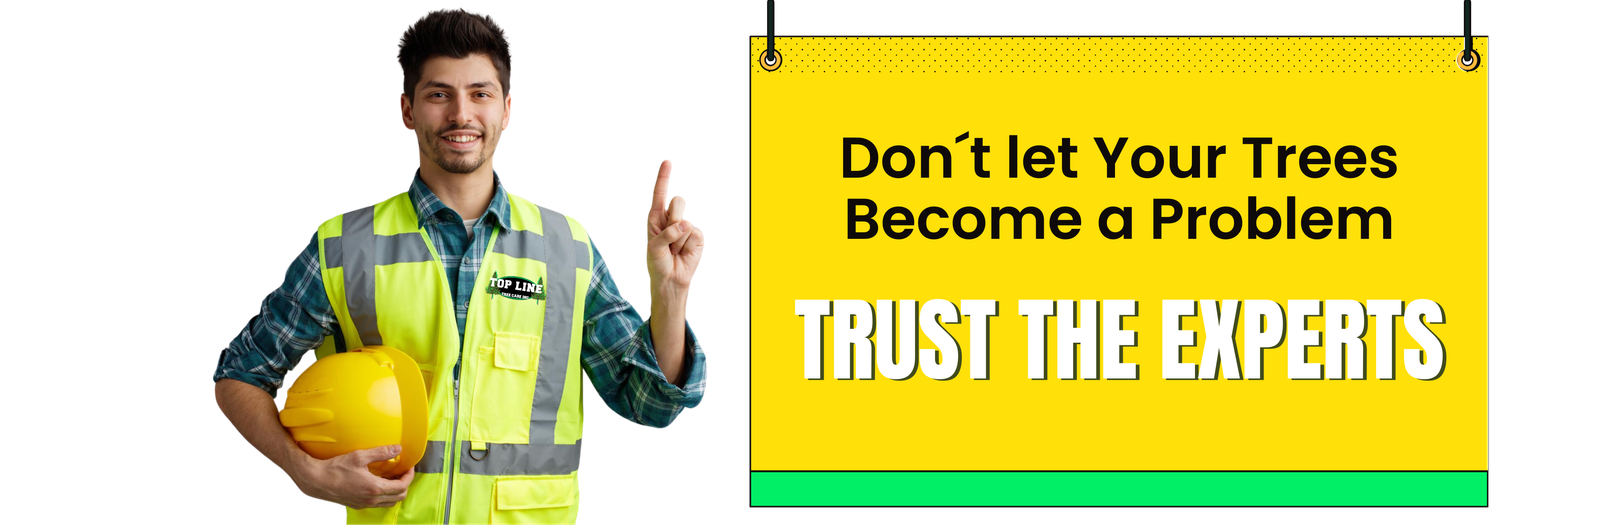 TOP LINE TRUST THE EXPERTS